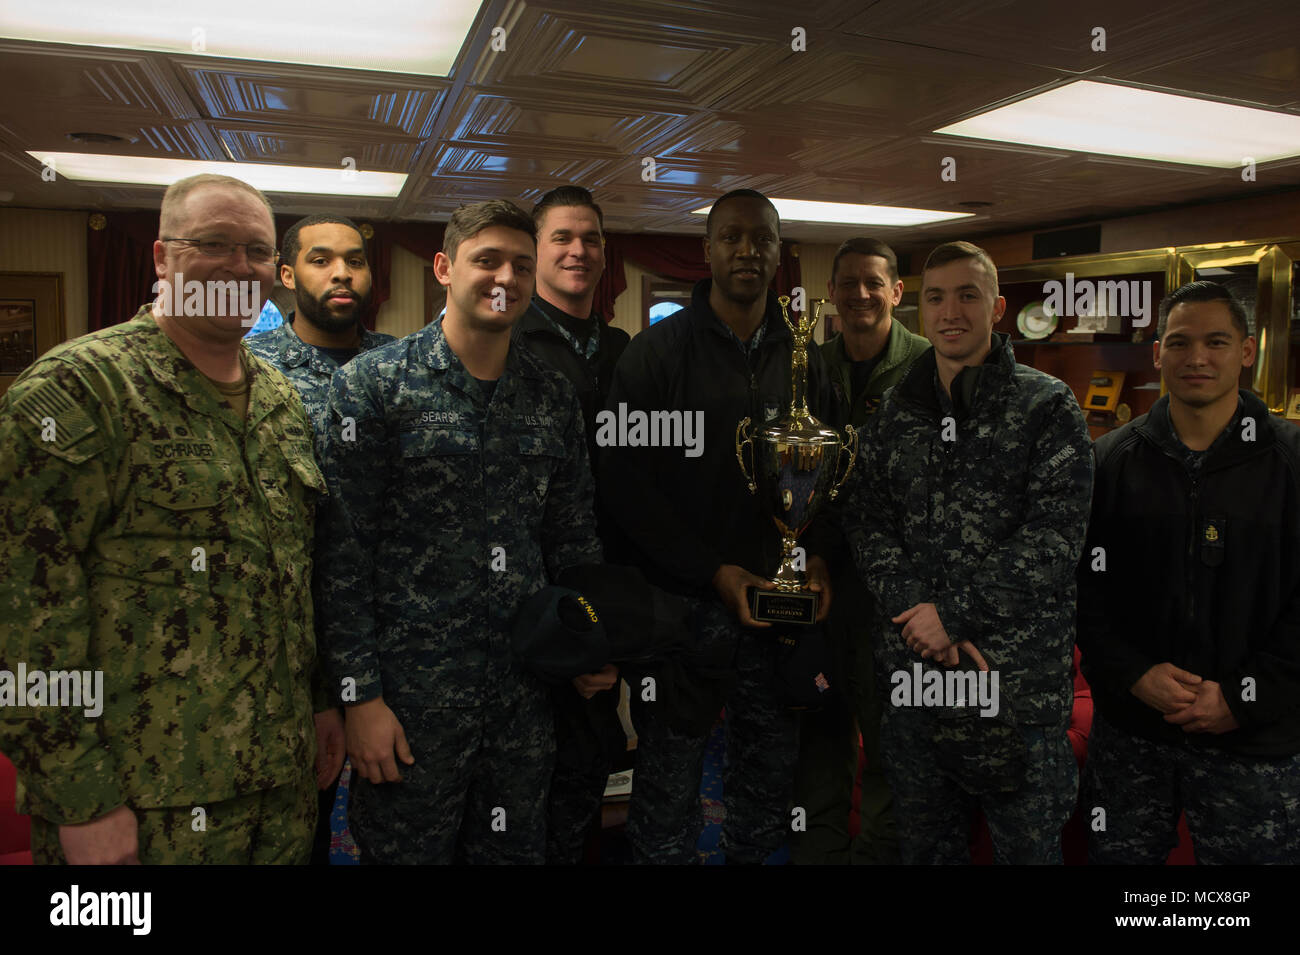 180302-N-QE928-012 BREMERTON, Wash. (March 2, 2018) John C. Stennis (CVN 74) Sailors, participants in Naval Base Kitsap Captain’s Cup events, pose for a photo with Capt. Greg Huffman, commanding officer of John C. Stennis, and Capt. Edward Alan Schrader, commanding officer of Naval Base Kitsap, aboard the ship. The Captain’s Cup is an element of the Navy’s intramural sports program and is presented to the team with the most points at the end of the calendar year.  John C. Stennis is in port conducting training as it continues preparing for its next scheduled deployment. (U.S. Navy photo by Mas Stock Photo